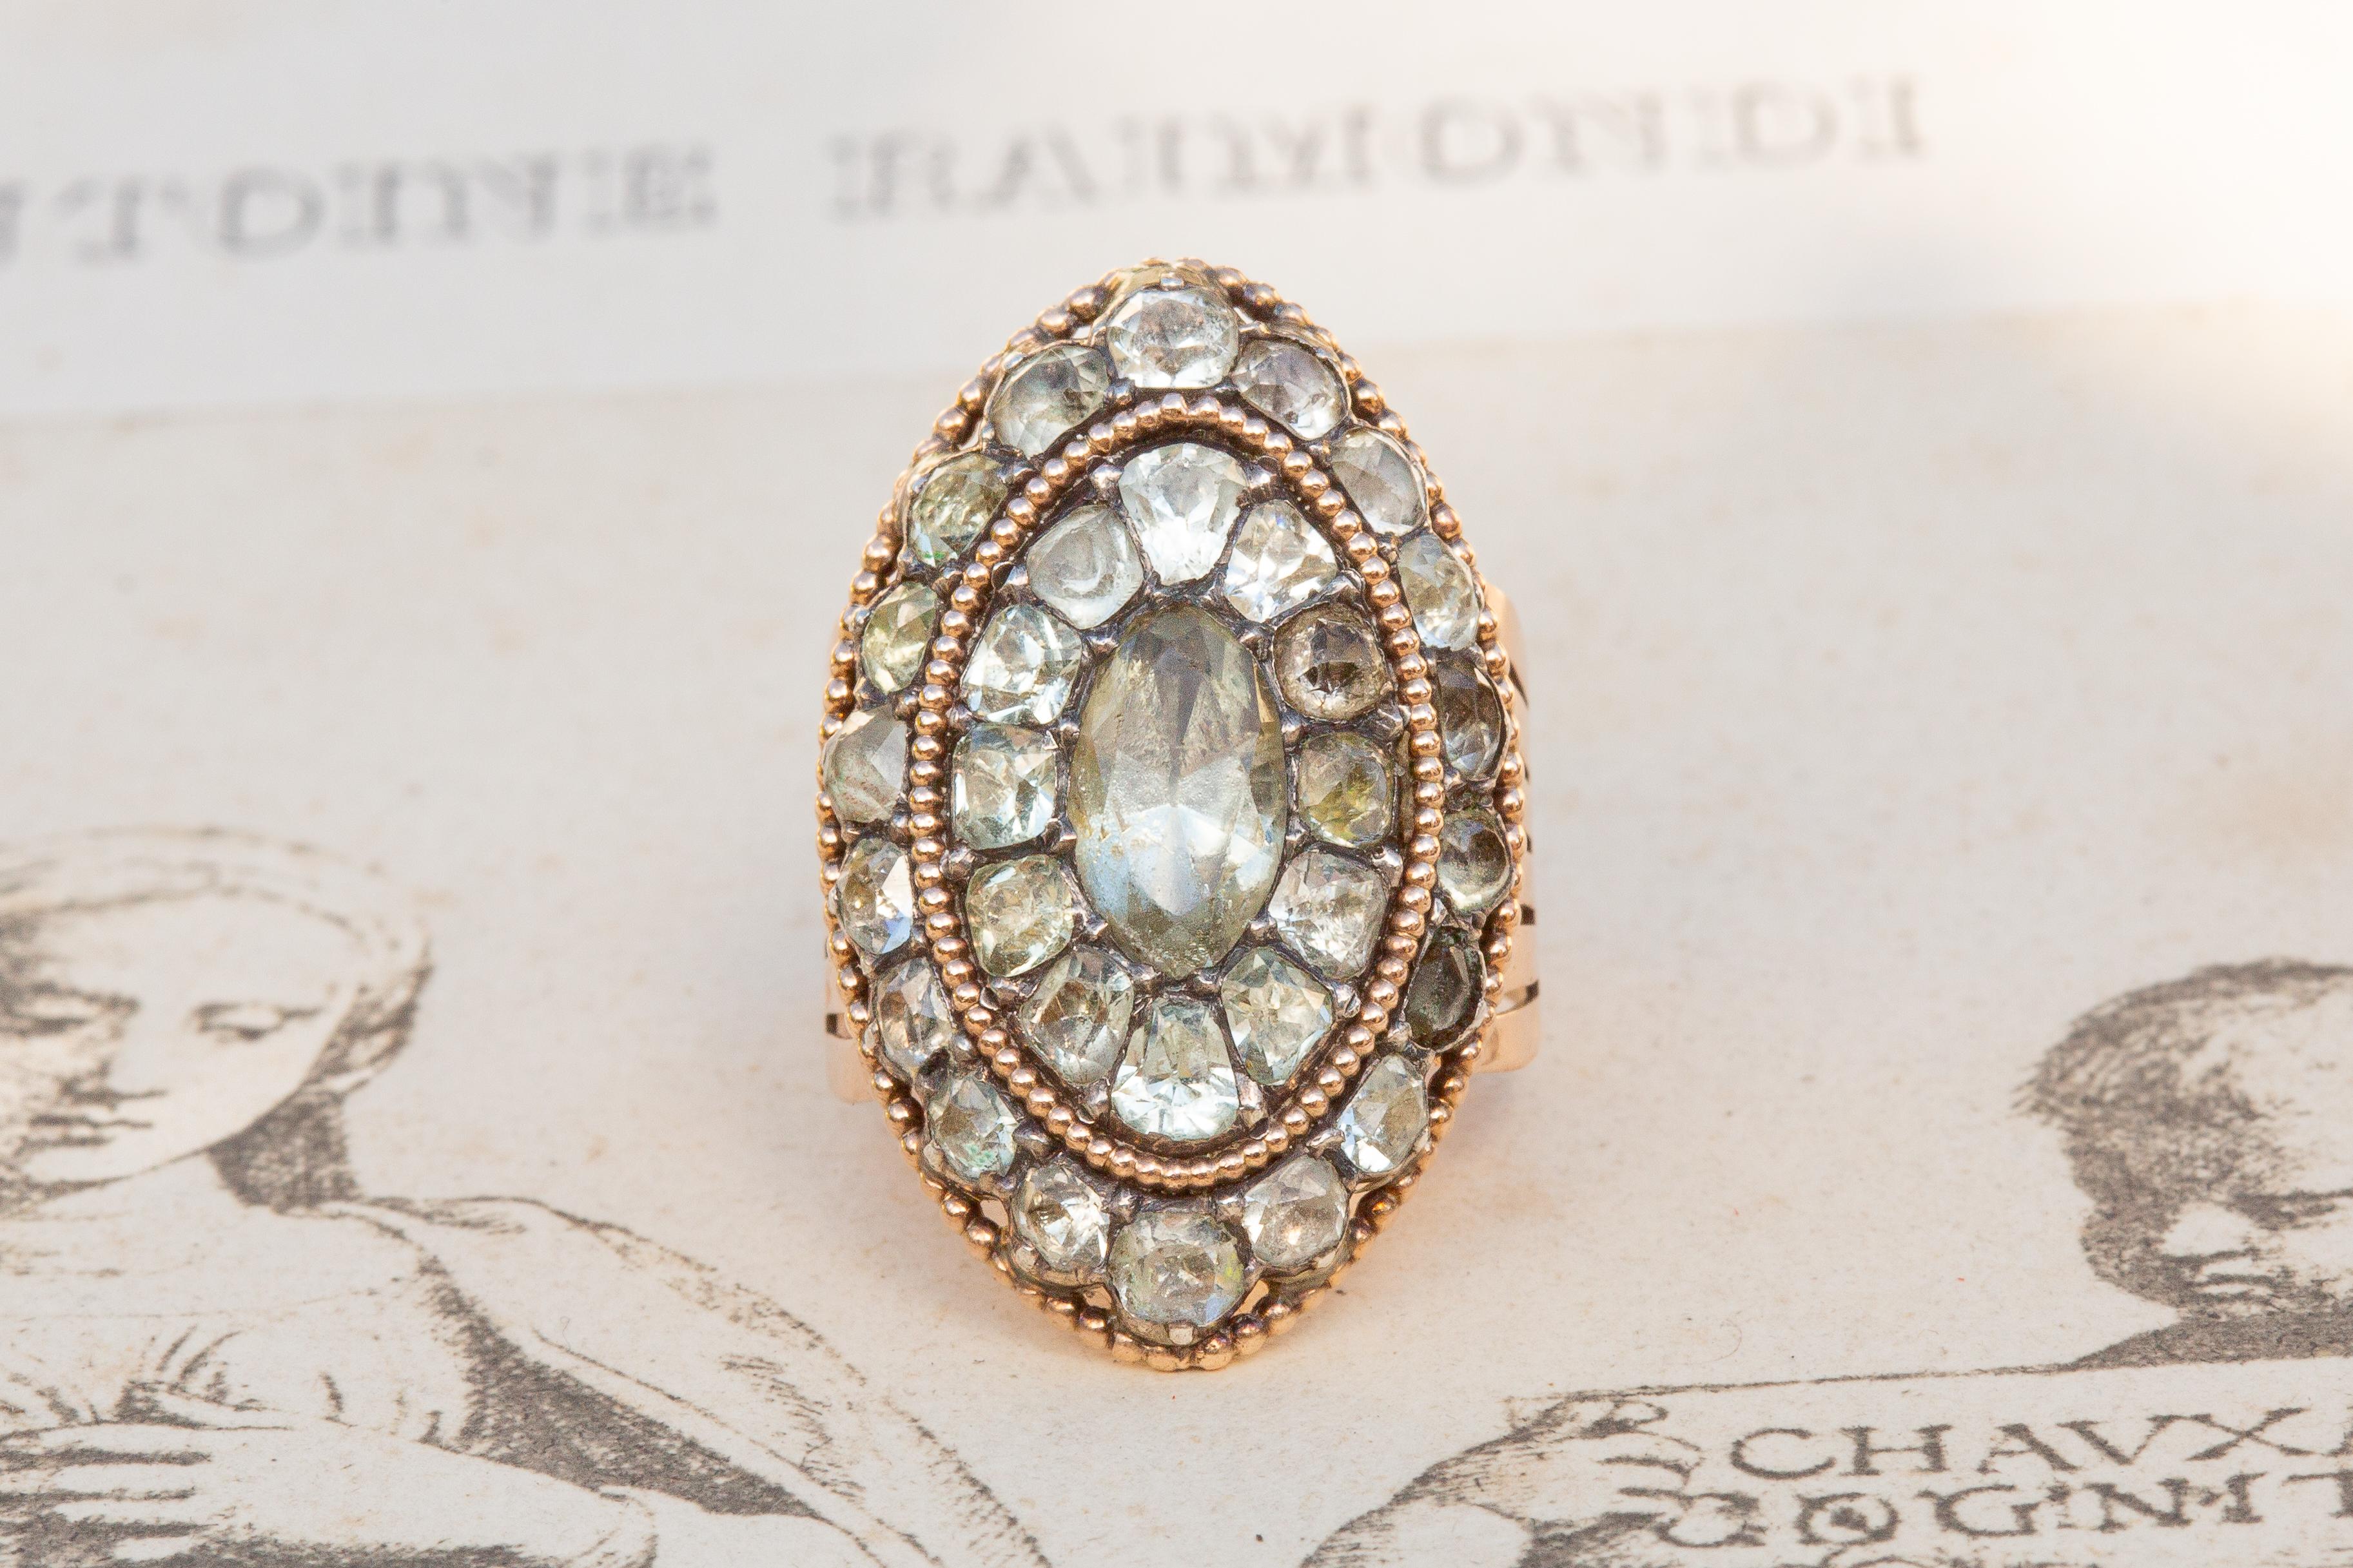 A rare Portuguese 18th century ‘minas novas’ rock crystal cluster ring, circa 1770. A lovely example of Georgian period Portuguese jewellery, this marquise-shaped ring was crafted in 15K gold and displays excellent craftsmanship. The larger central